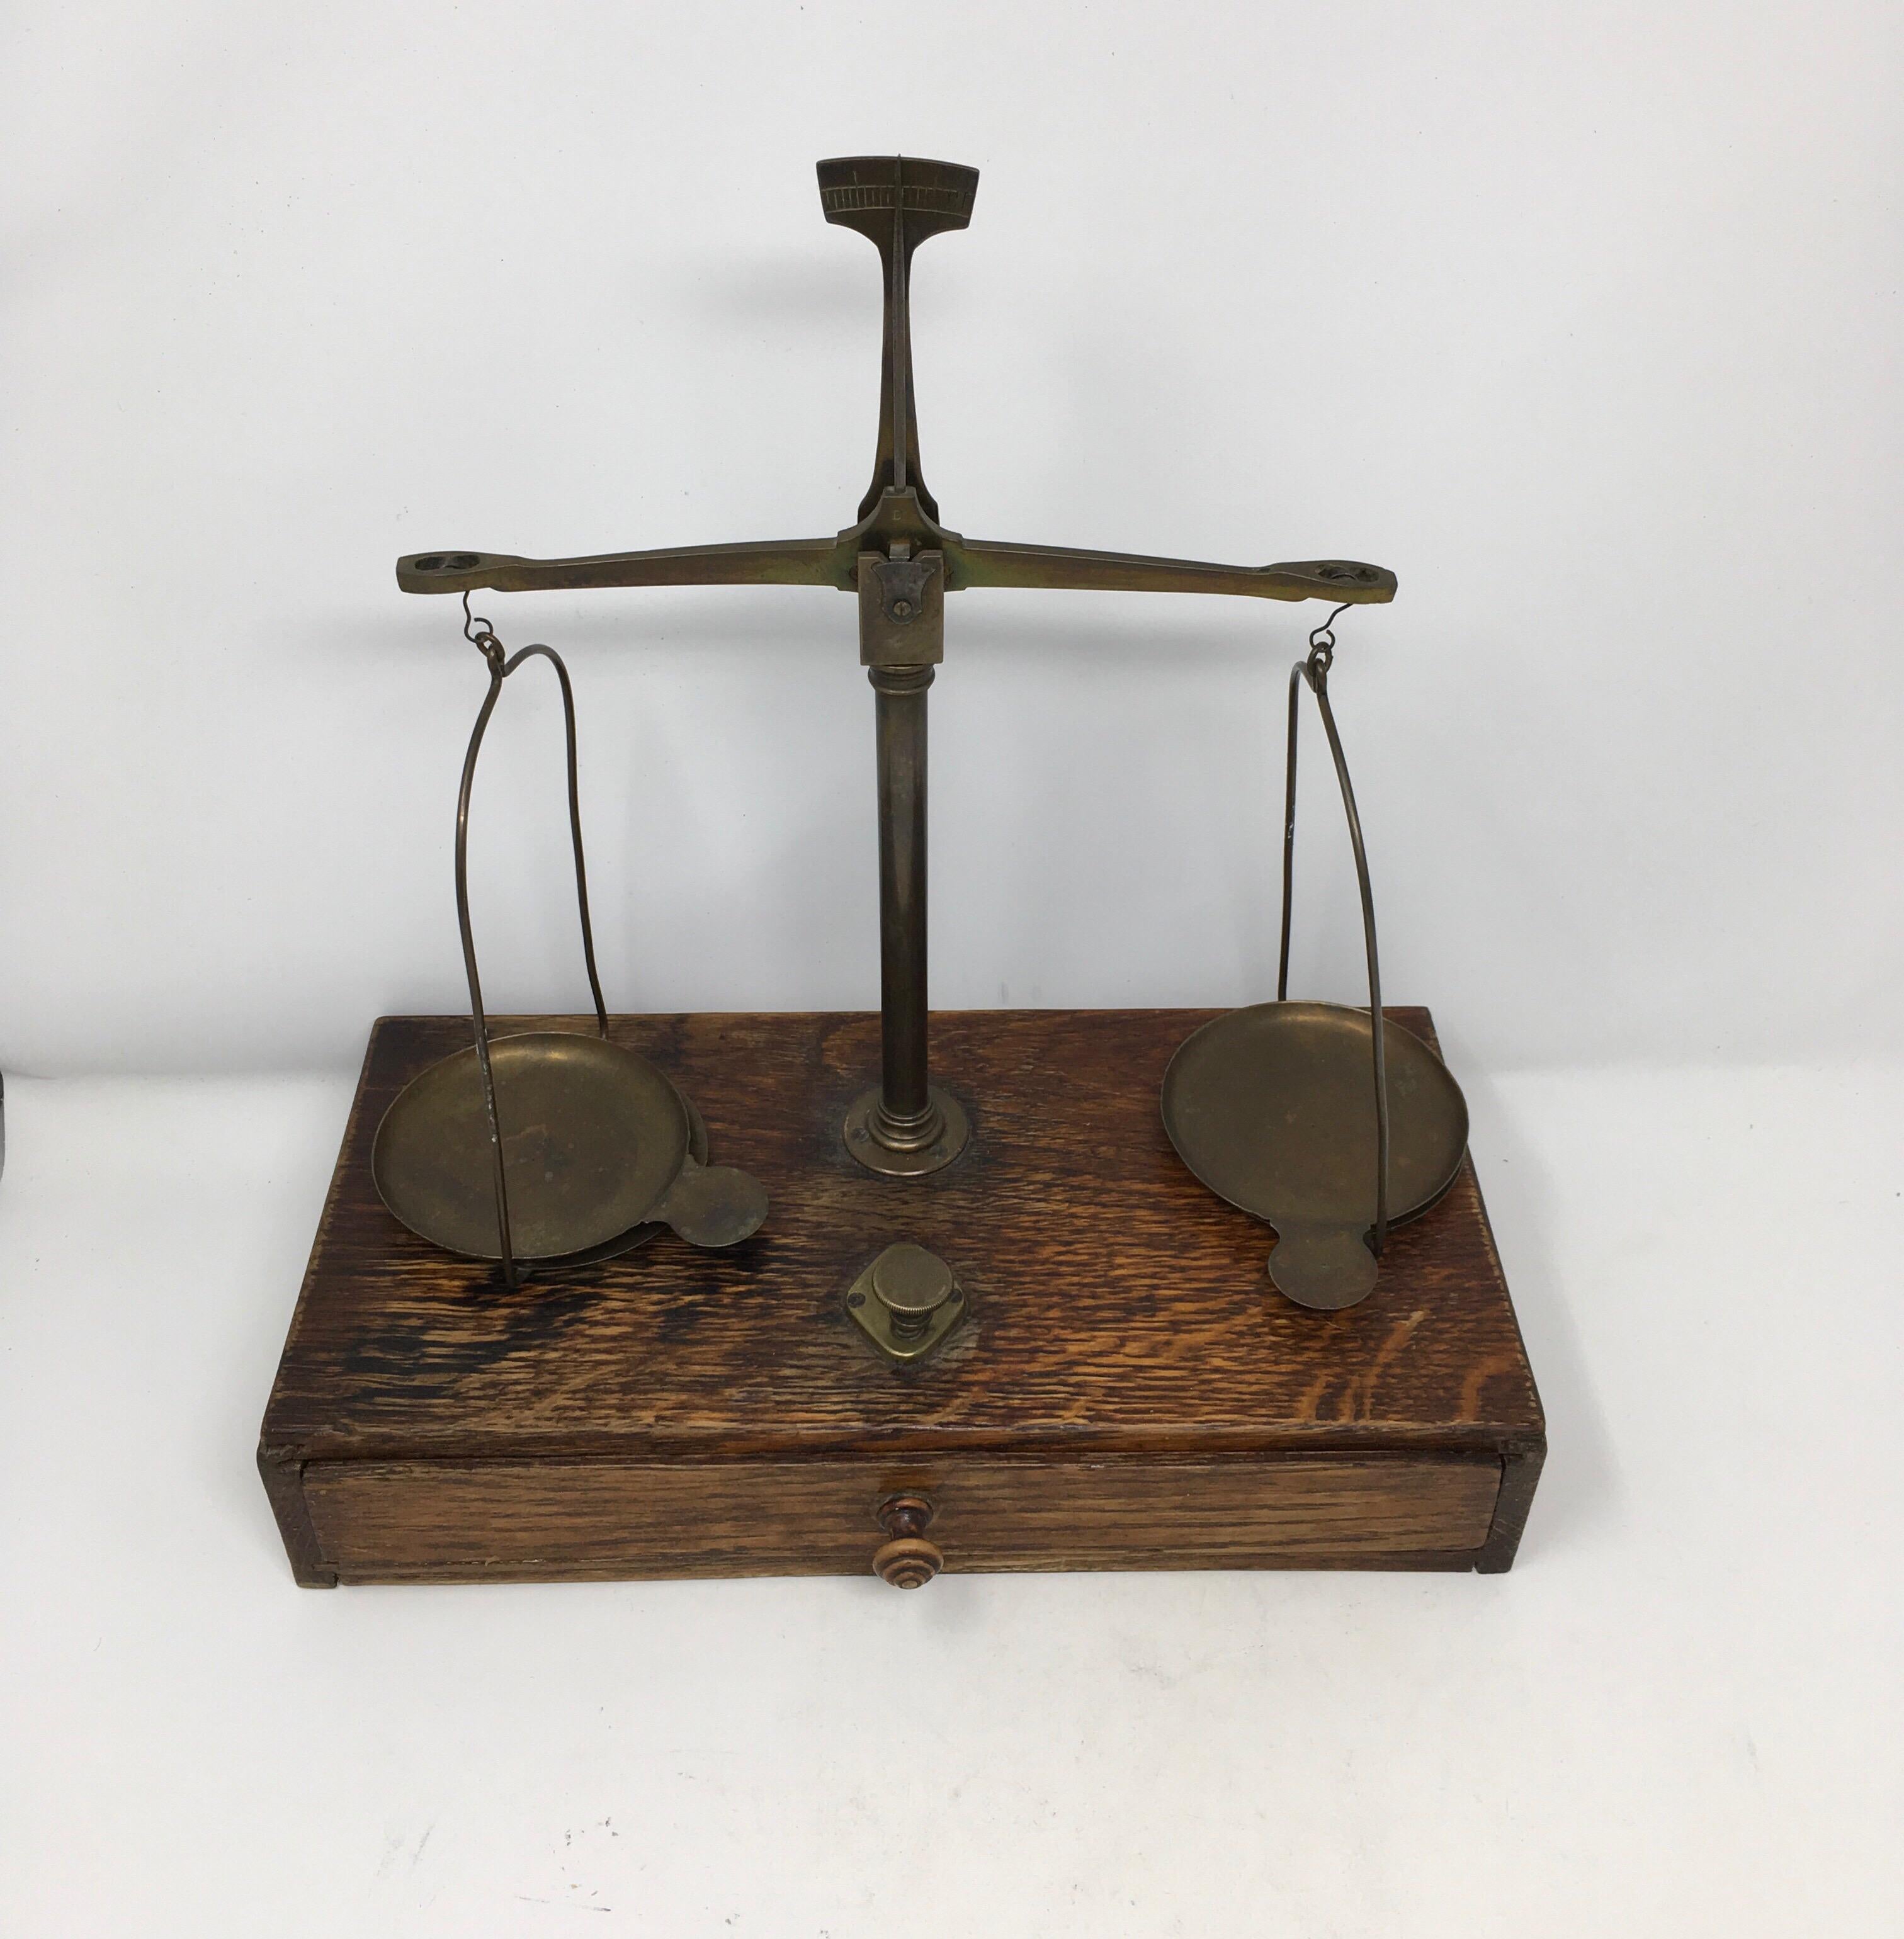 Found in Southern France, these brass and wood apothecary scales where used in French pharmacies throughout the country. The scales and weights are brass housed on a wooden base with a drawer. Although some of the weights are missing, these scales